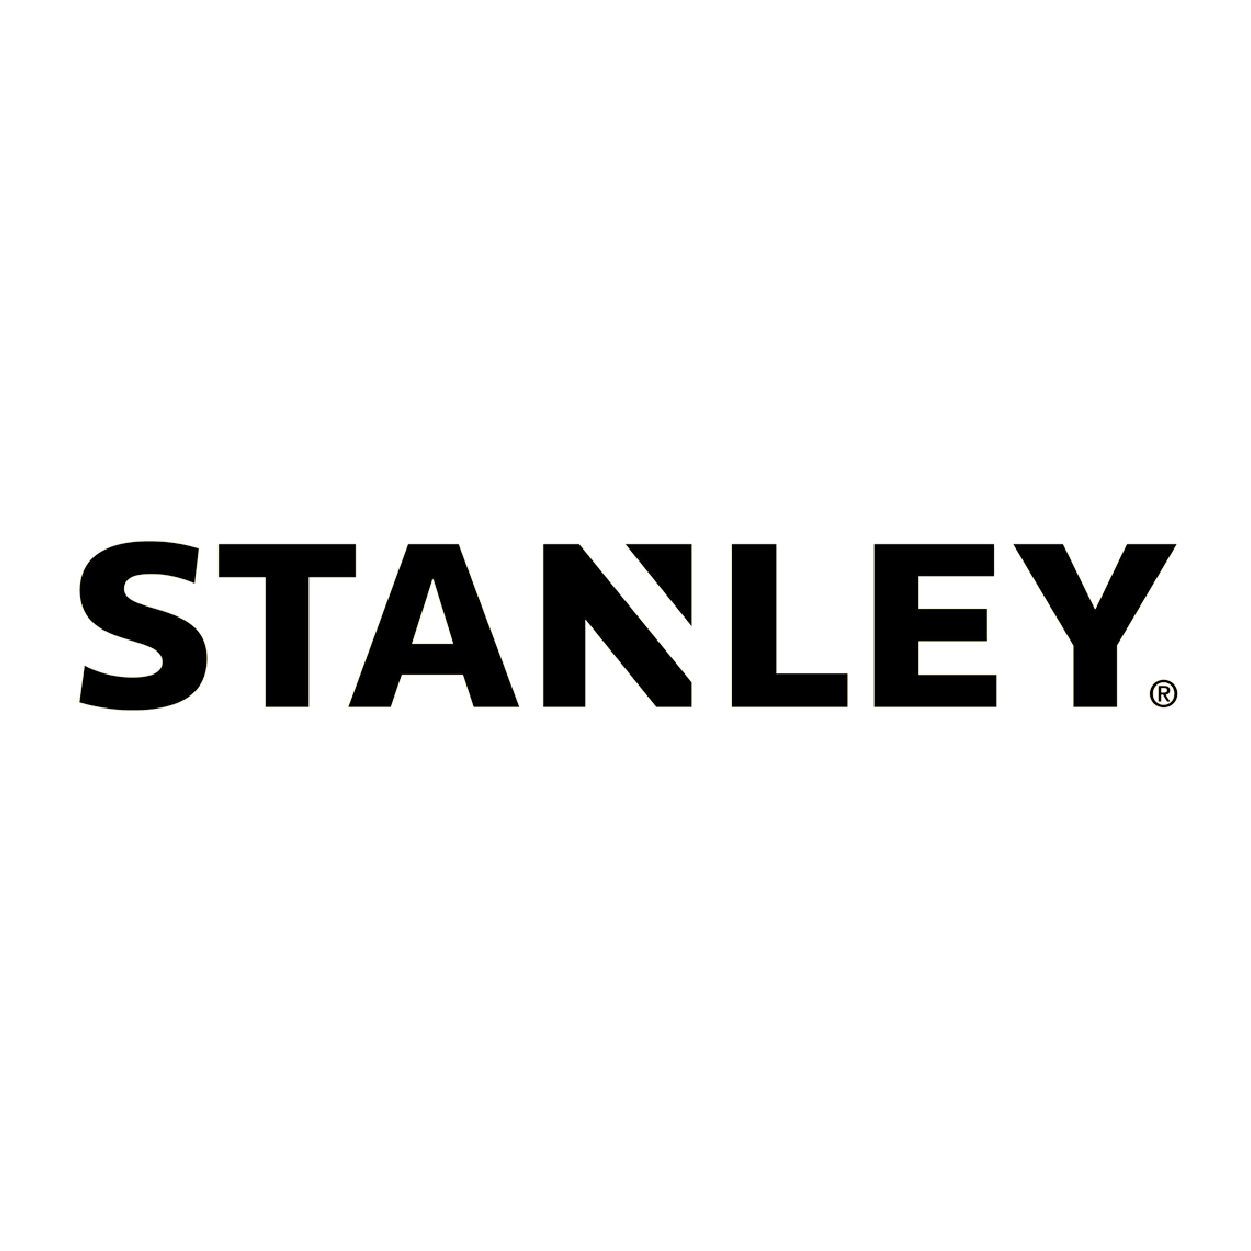 Stanley.png